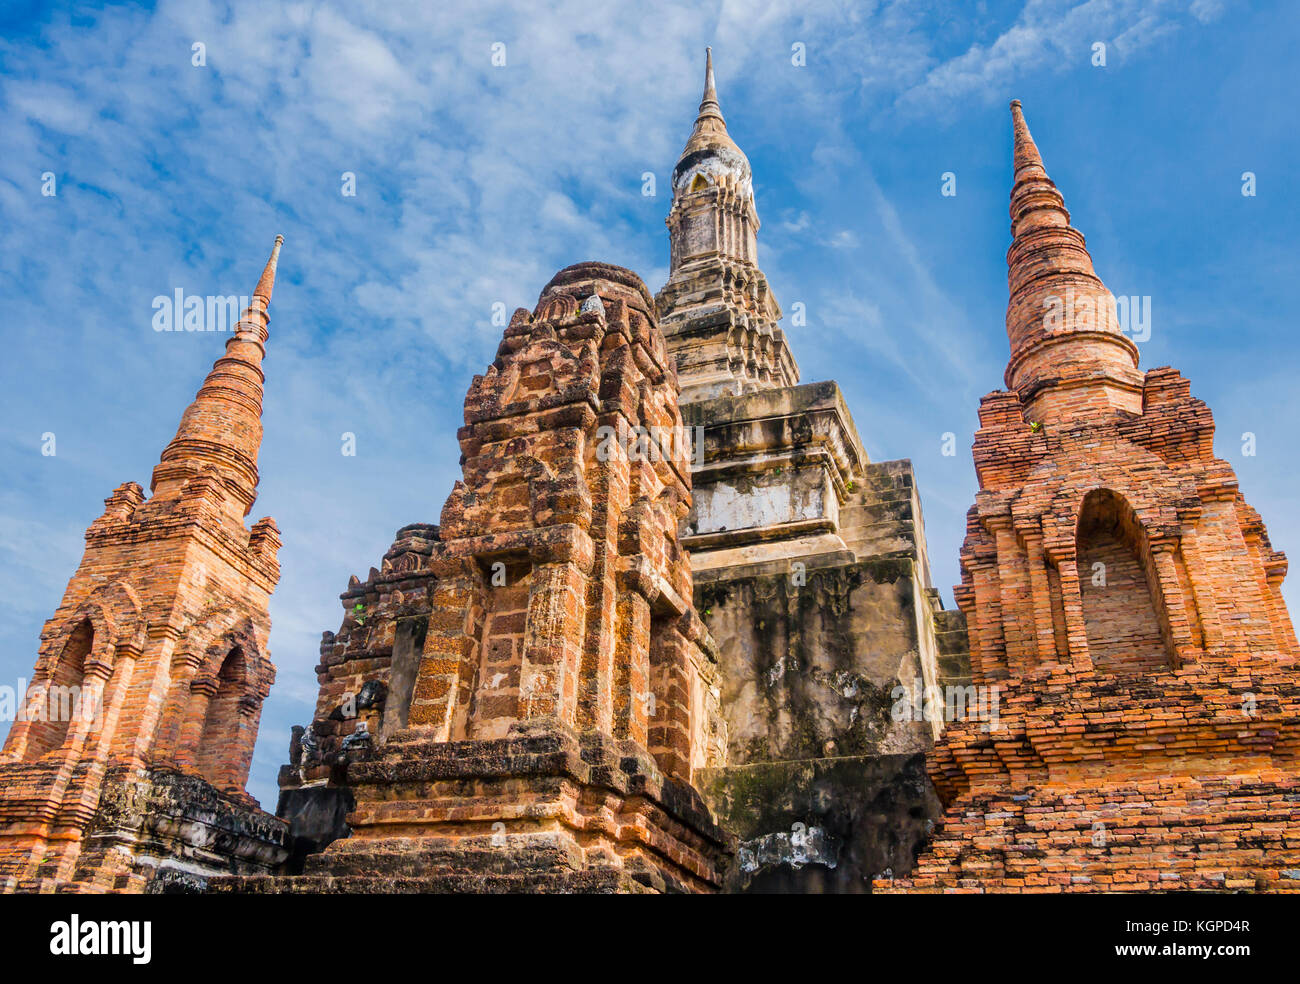 Perspective view of Stupa and Pagoda in Wat Mahathat Temple, Sukhothai Historical Park, Thailand Stock Photo